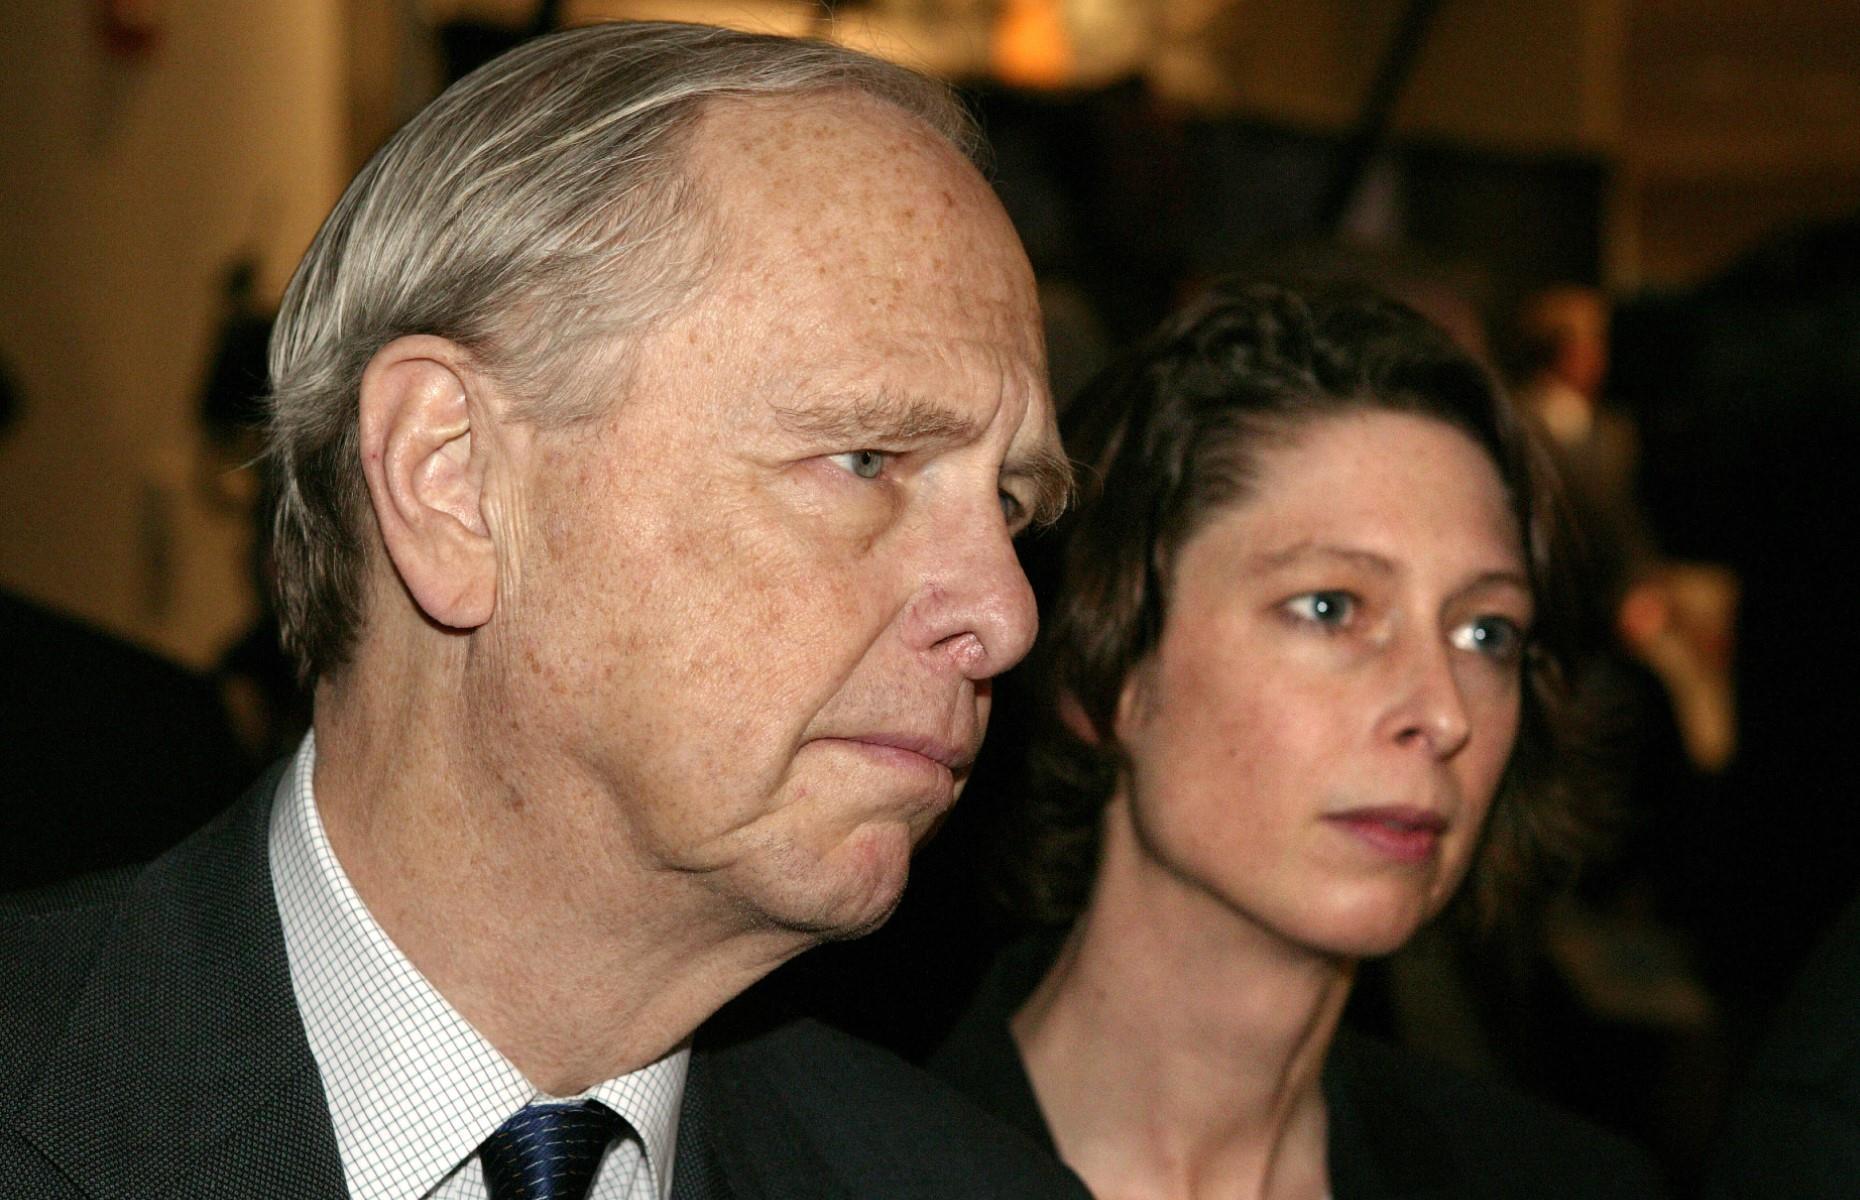 <p>Edward C Johnson II founded the mutual fund Fidelity in 1946, before his son of the same name took over. </p>  <p>Edward Johnson III (pictured with his daughter Abigail) ran the business until 2014, and then he passed the responsibility on to his daughter. He passed away in March this year.</p>  <p>Abigail has a $21.5 billion personal fortune. The Johnson family owns 49% of Fidelity, while the other 51% is owned by employees. </p>